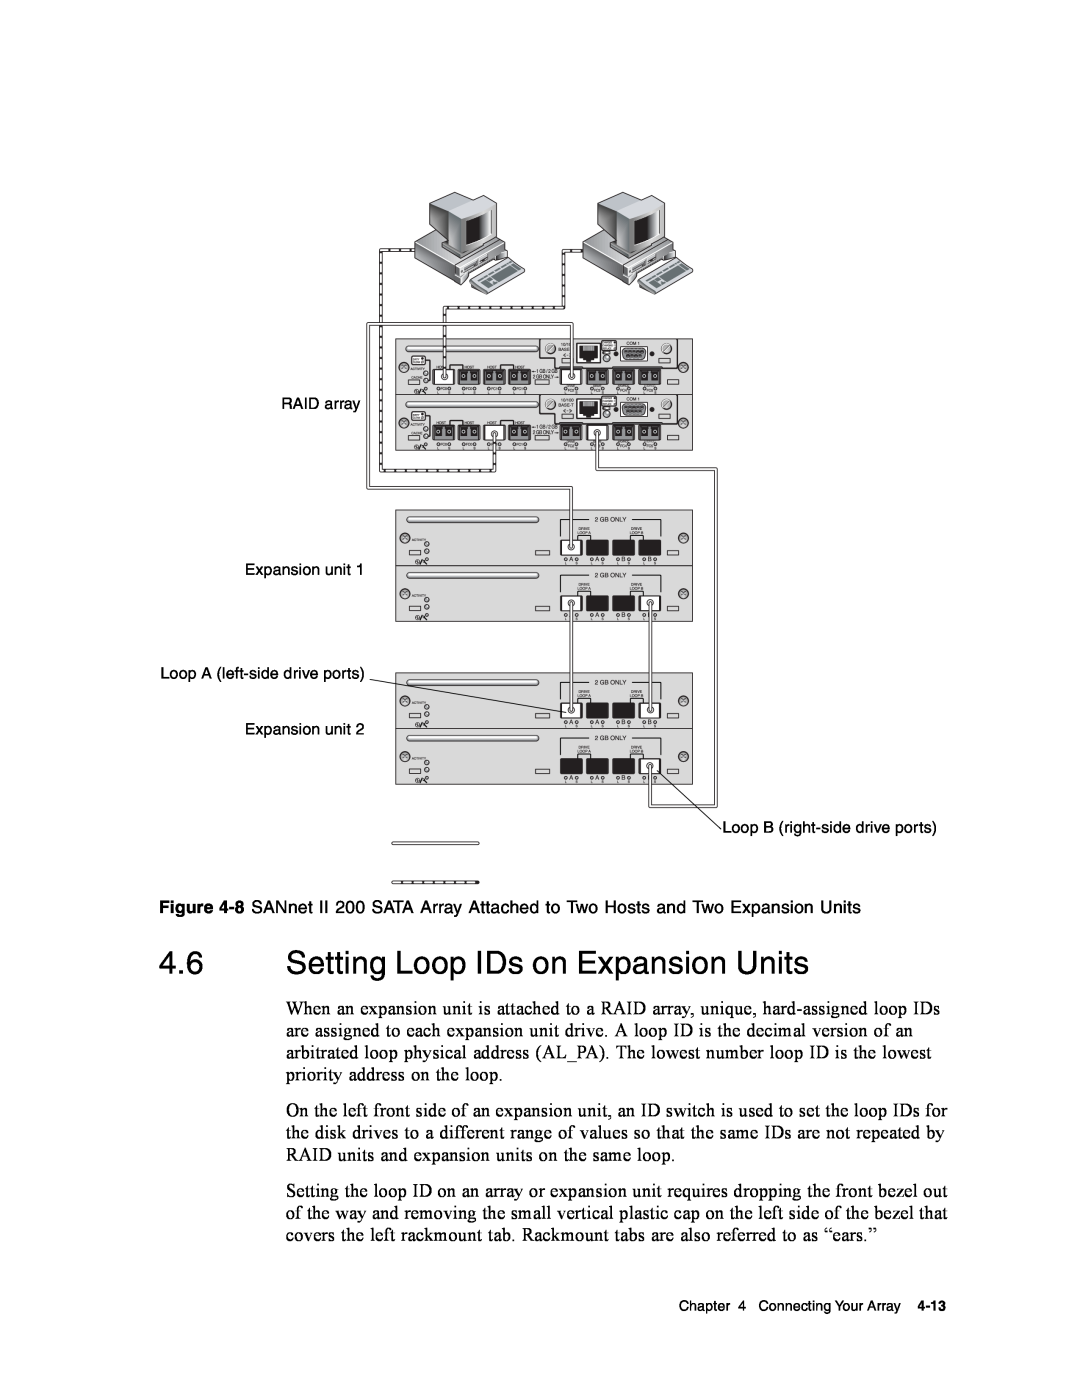 Dot Hill Systems II 200 FC Setting Loop IDs on Expansion Units, Cable to drive, Loop B right-side drive ports 